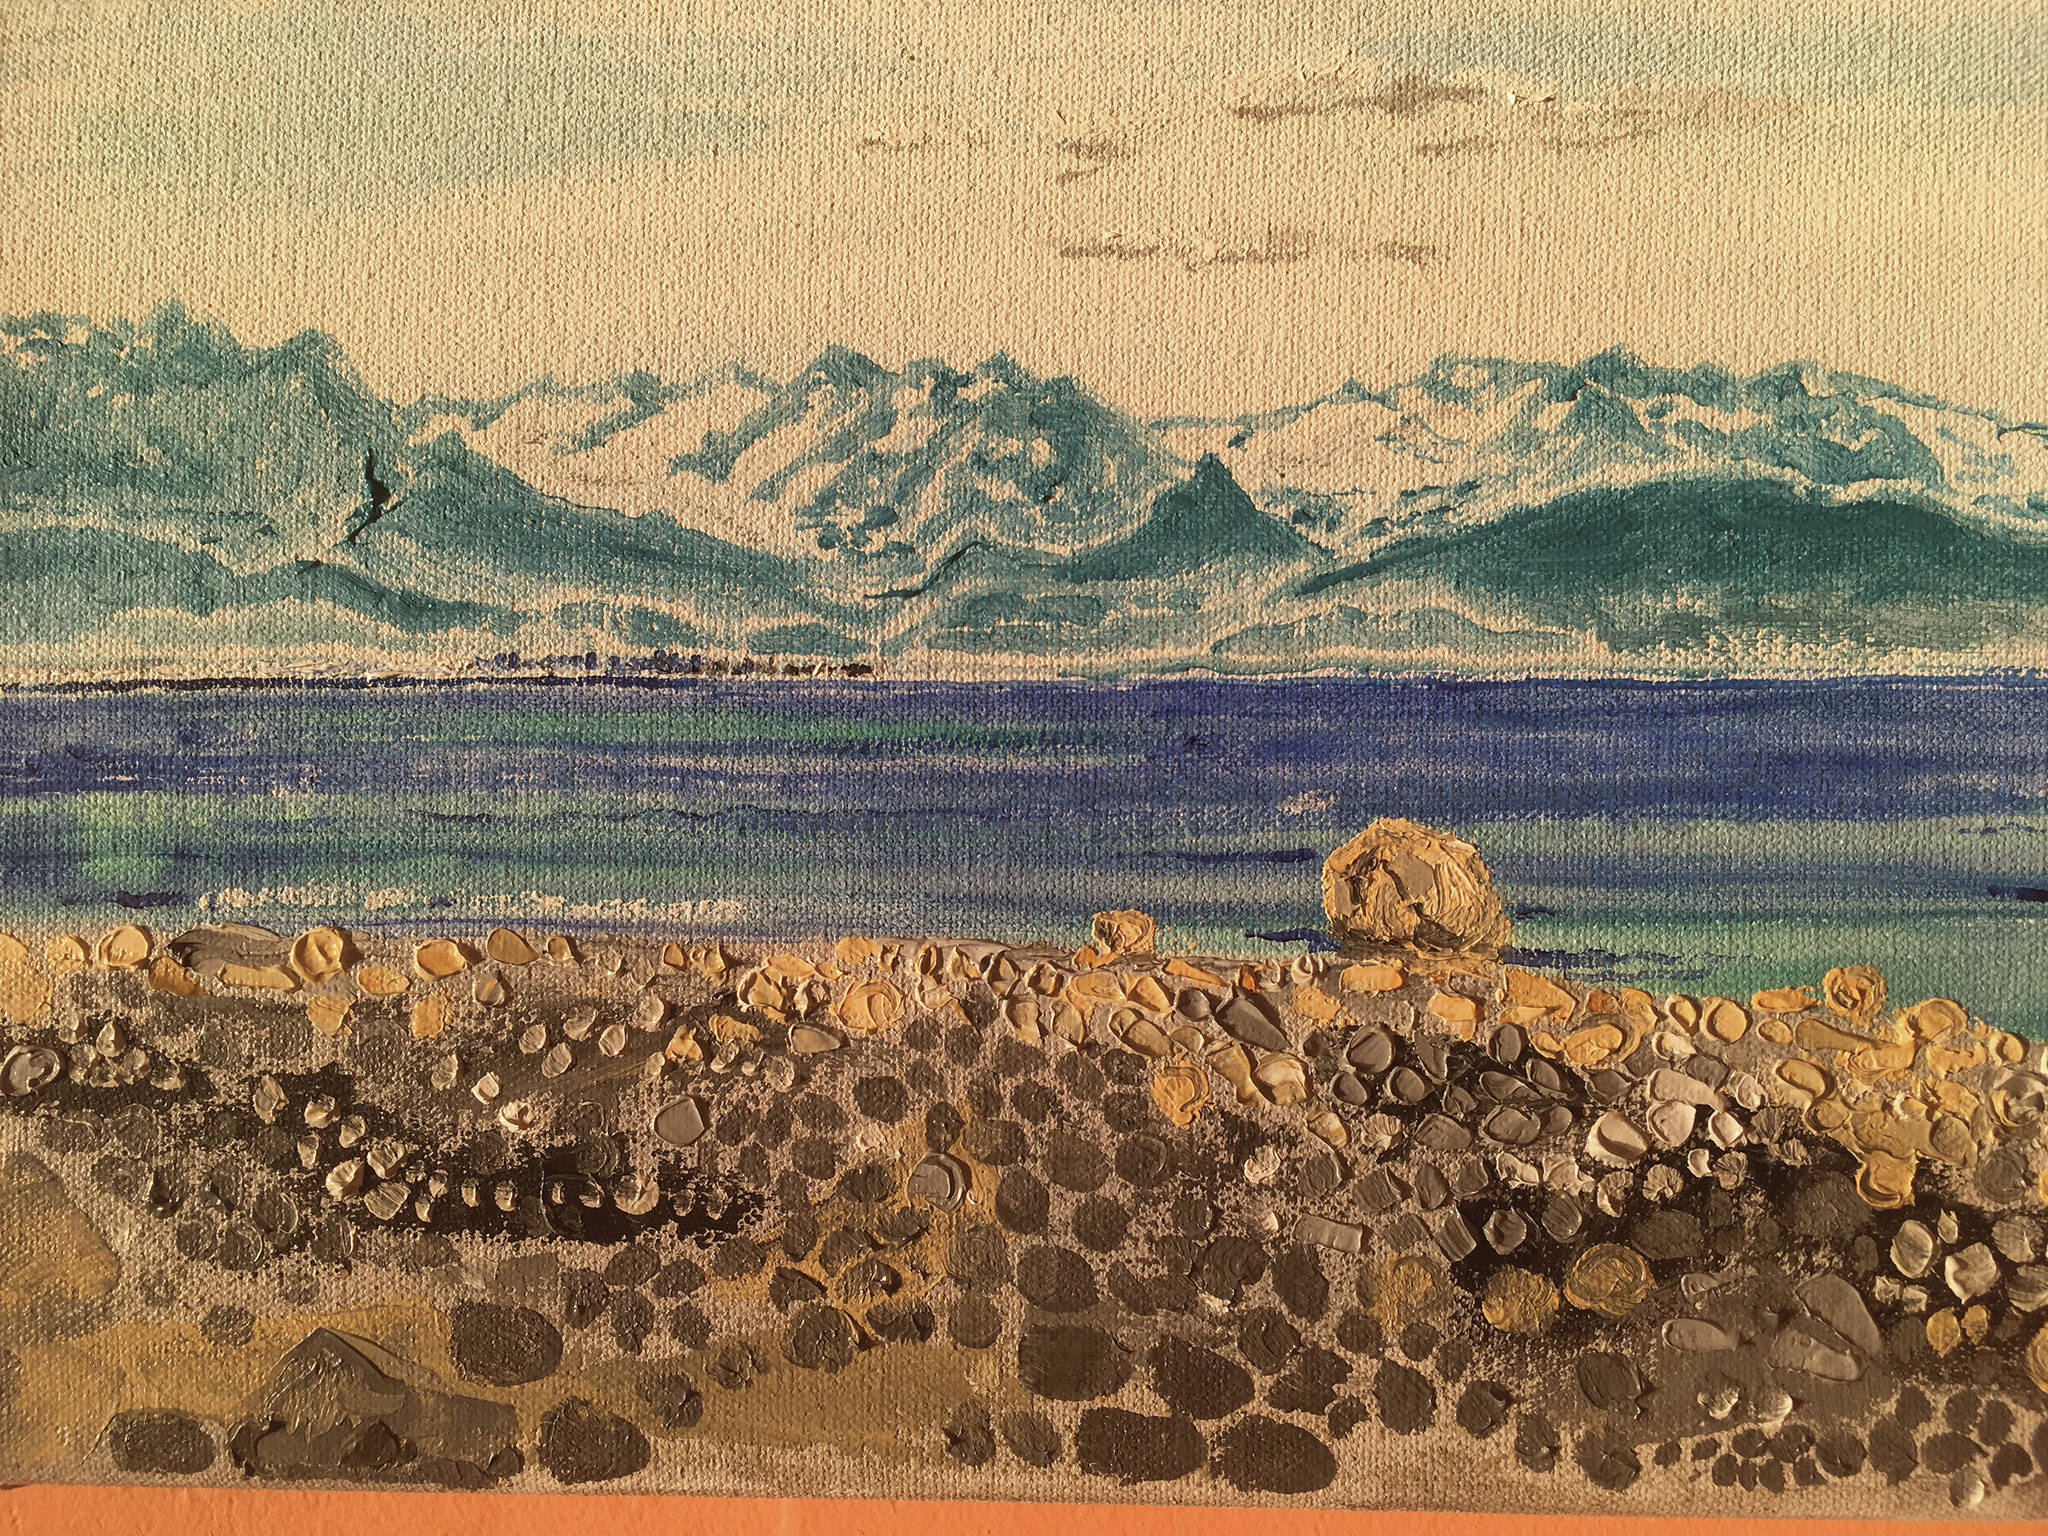 Debi Poore’s “Many Moods of the Wosnesenski” features her art inspired by the river and glacier on Kachemak Bay. Poore’s art is featured at Grace Ridge Brewery for February 2020 at the brewery in Homer, Alaska. (Photo courtesy of Grace RidgeBrewery)